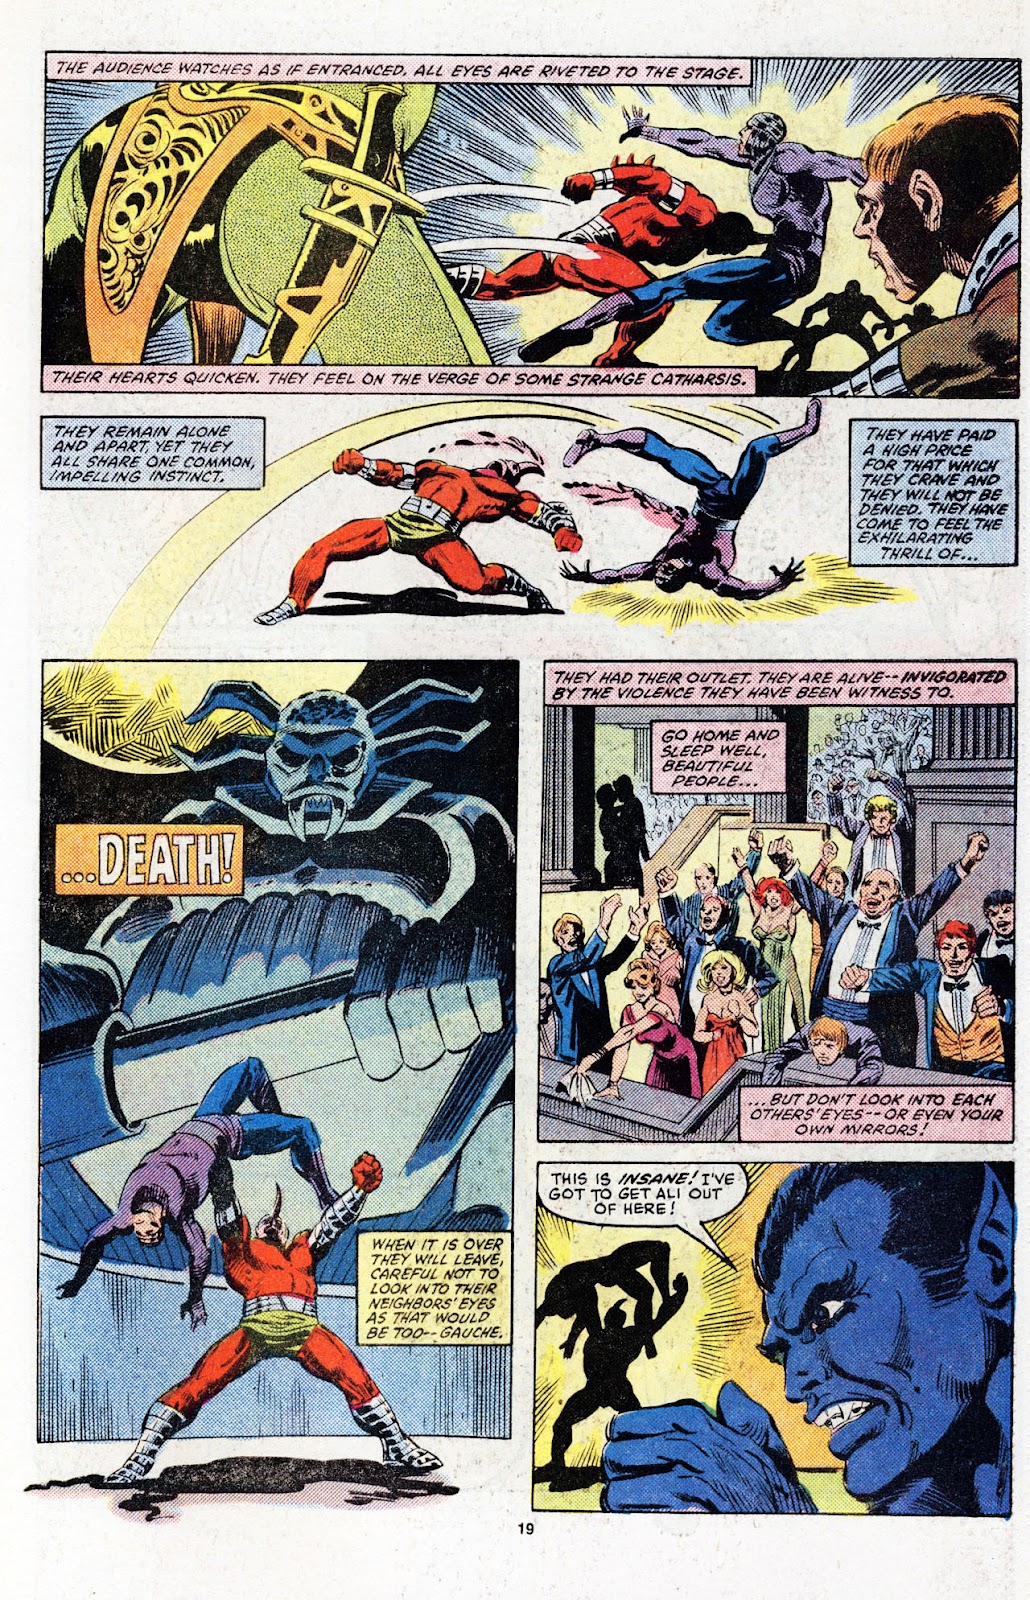 Beauty and the Beast (1984) issue 2 - Page 27